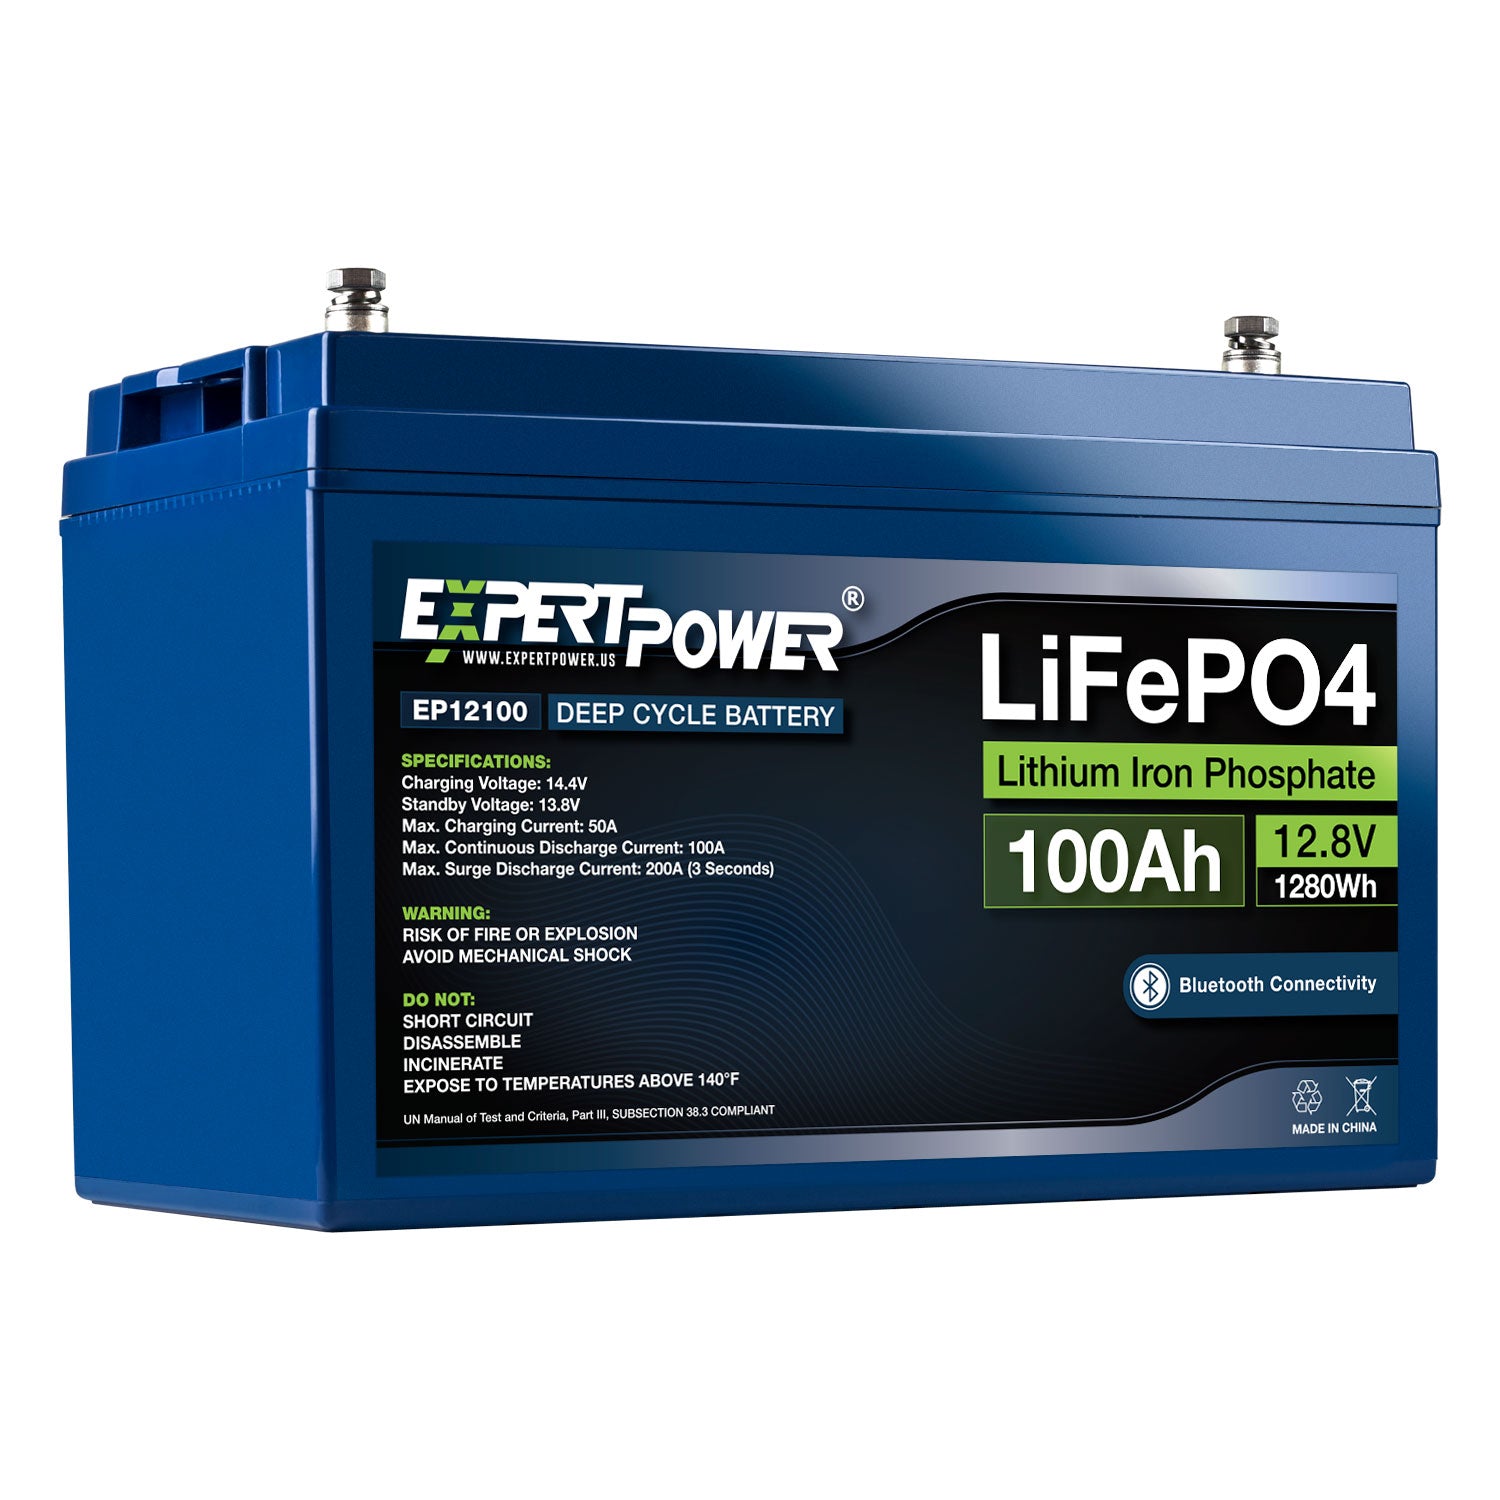 24V 200ah LiFePO4 Battery Built-in 100A BMS with Bluetooth ship from China